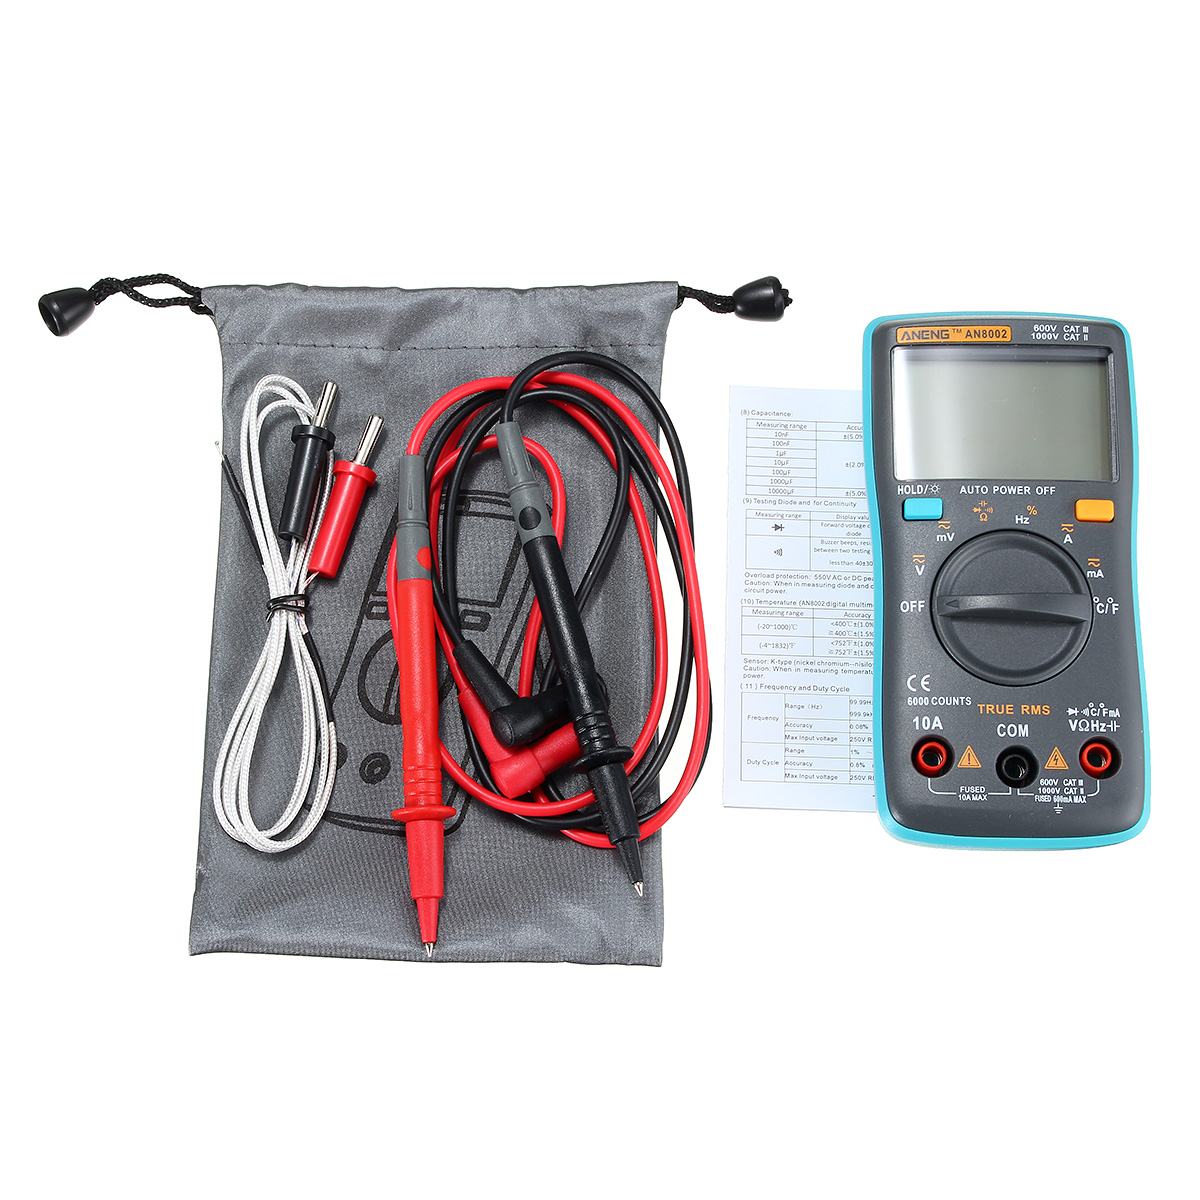 ANENG AN8002 Digital True RMS 6000 Counts Multimeter AC/DC Current Voltage Frequency Resistance Temperature Tester ℃/℉ 22